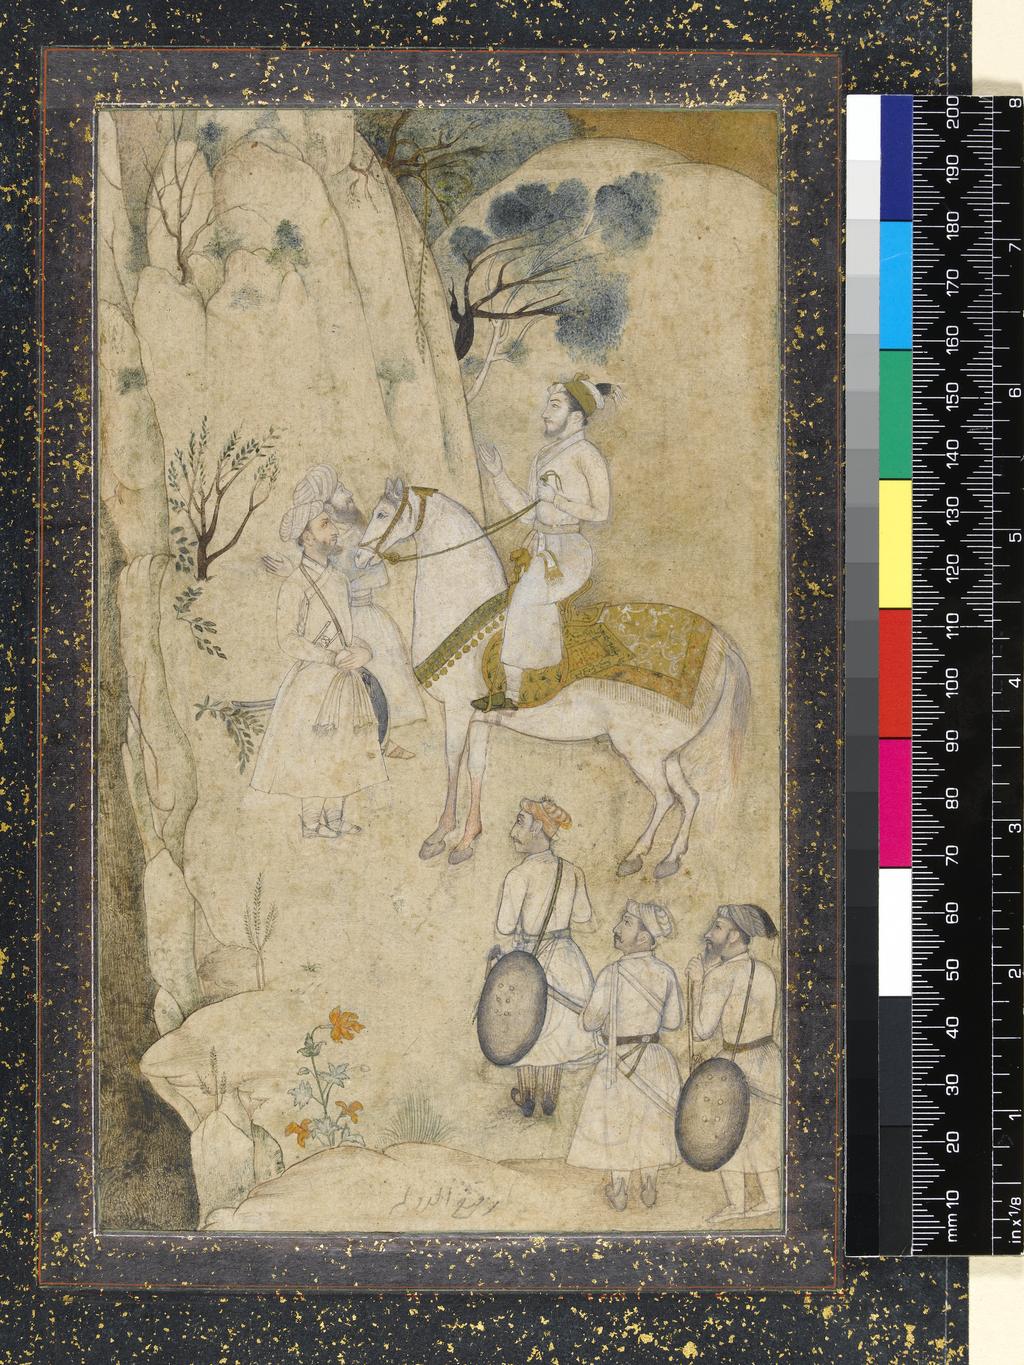 An image of A Prince on Horseback, with Five Attendants, Regarding a Waterfall. Unknown, Mogul School. Watercolour with pen and ink, graphite and gold on laid paper, laid down, height 197 mm, width 120 mm.